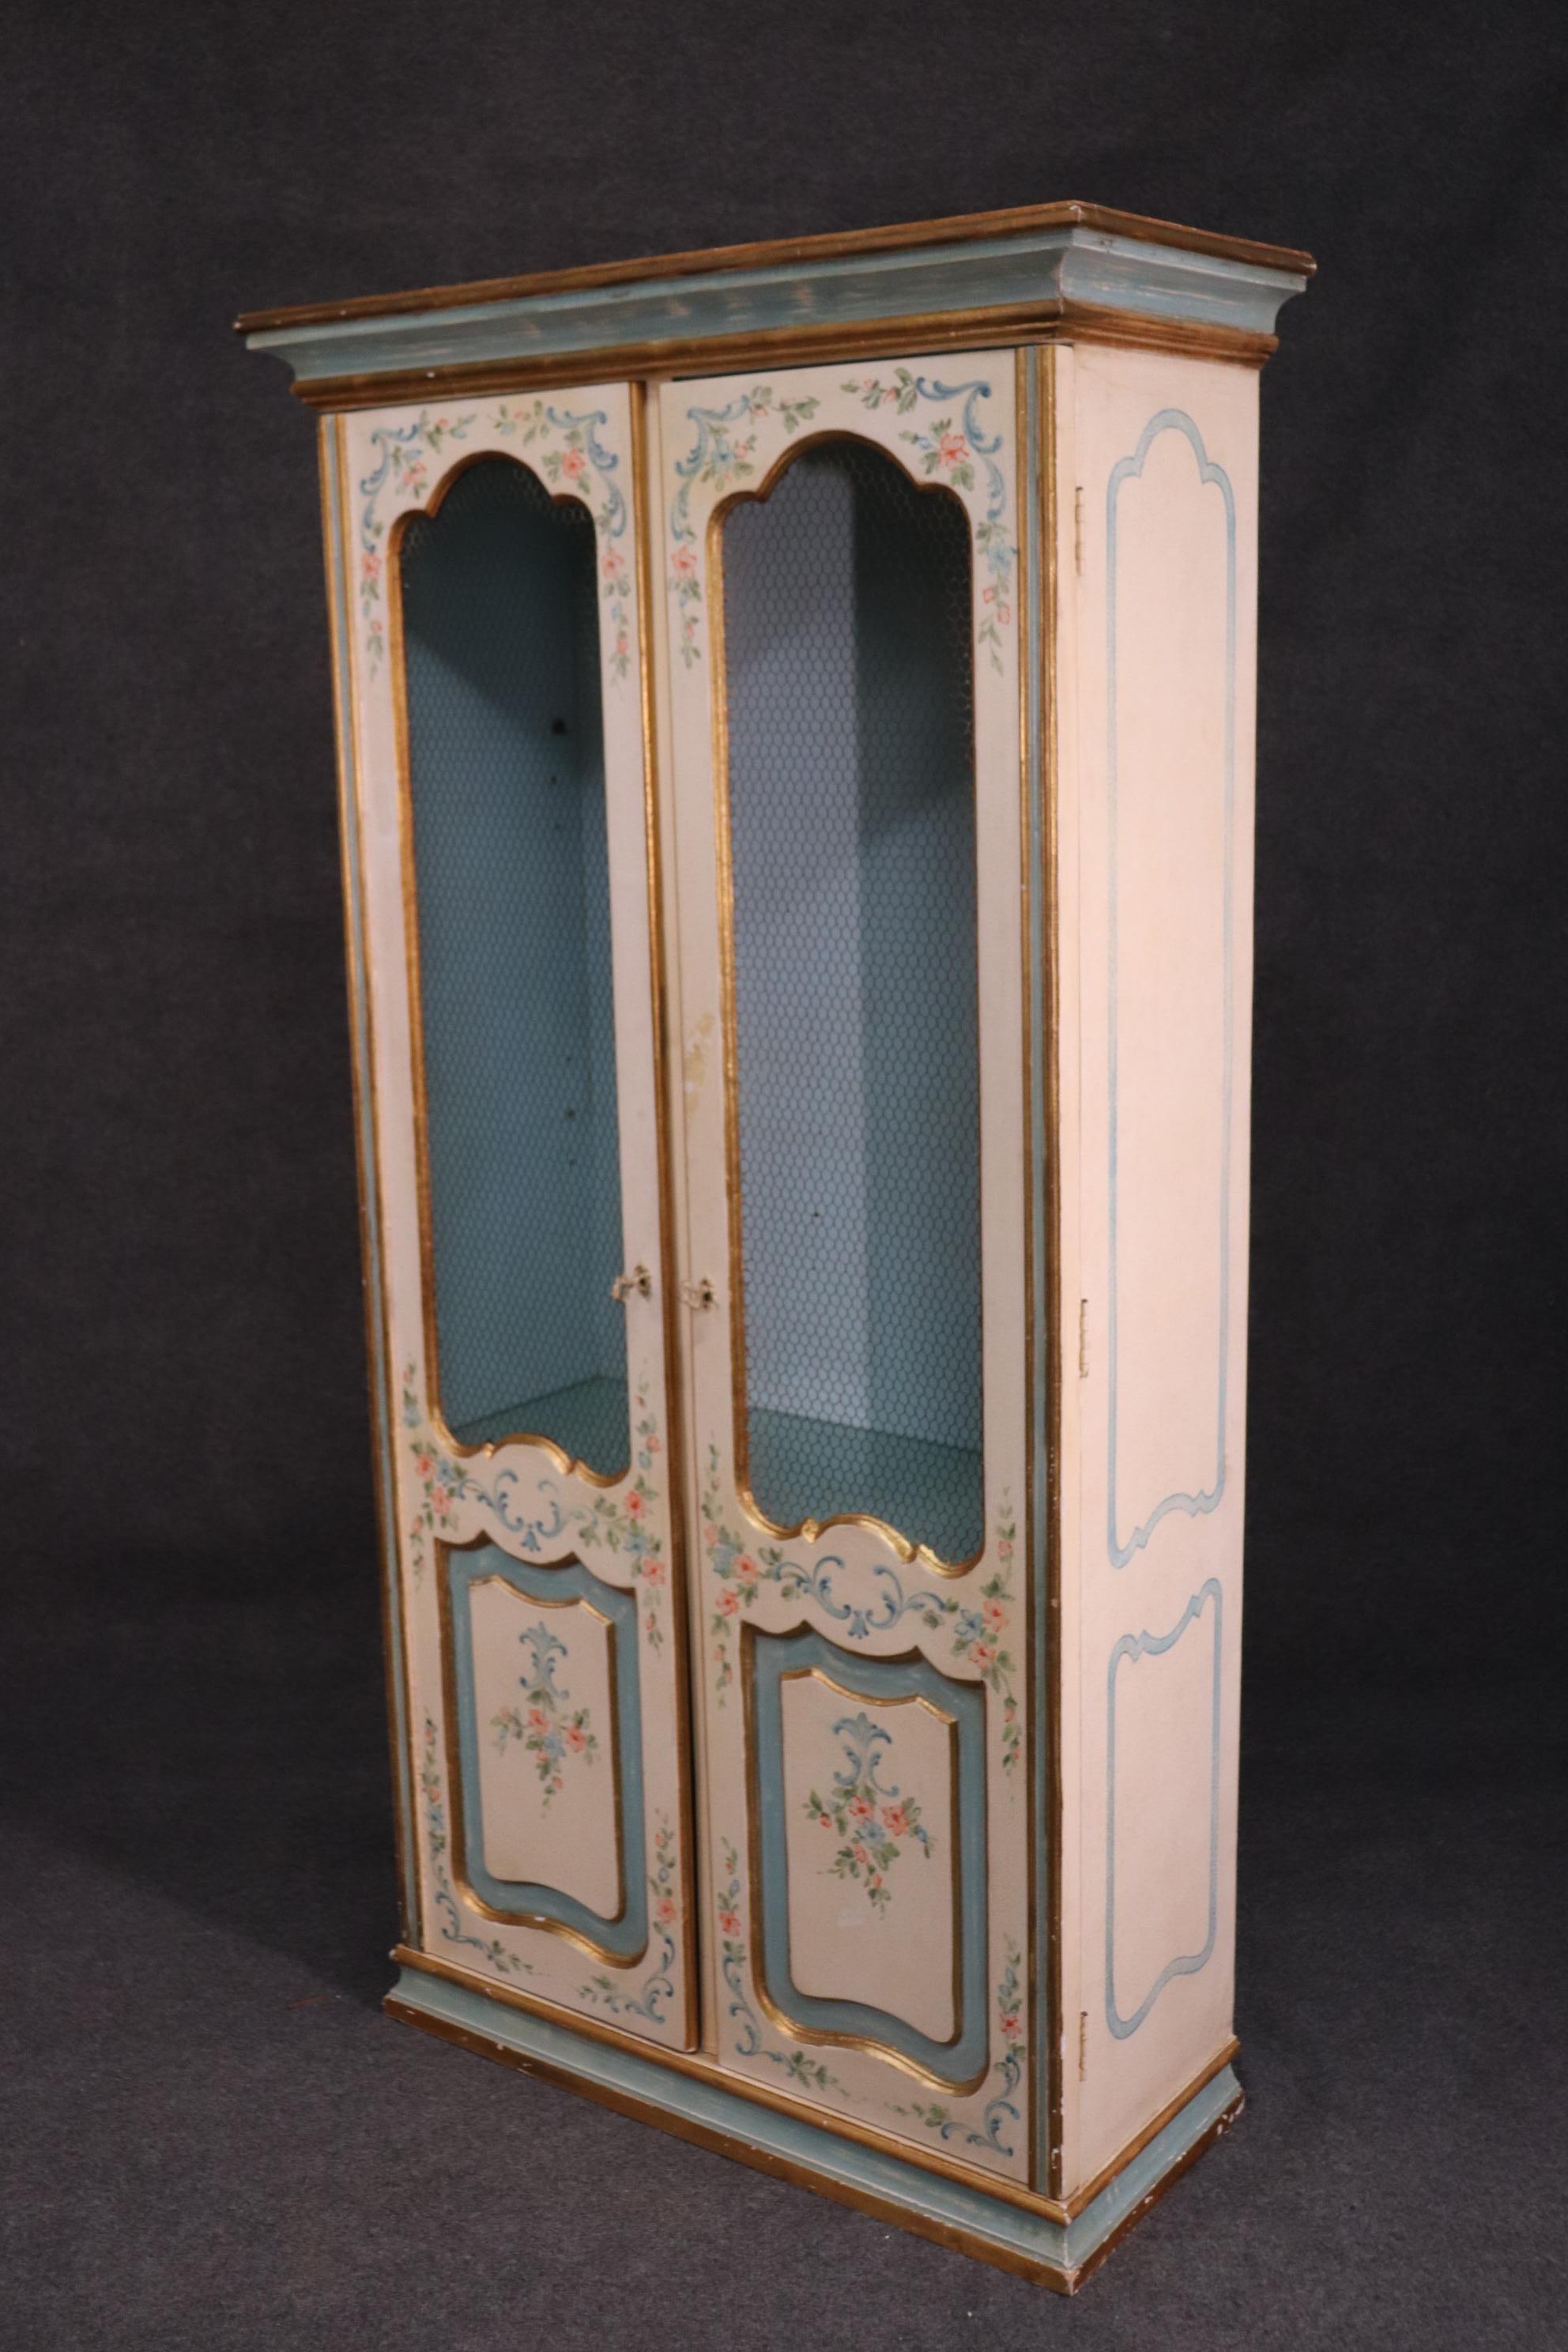 Italian Antique Distress Paint Decorated Lighted Display Curio Cabinet Vitrine